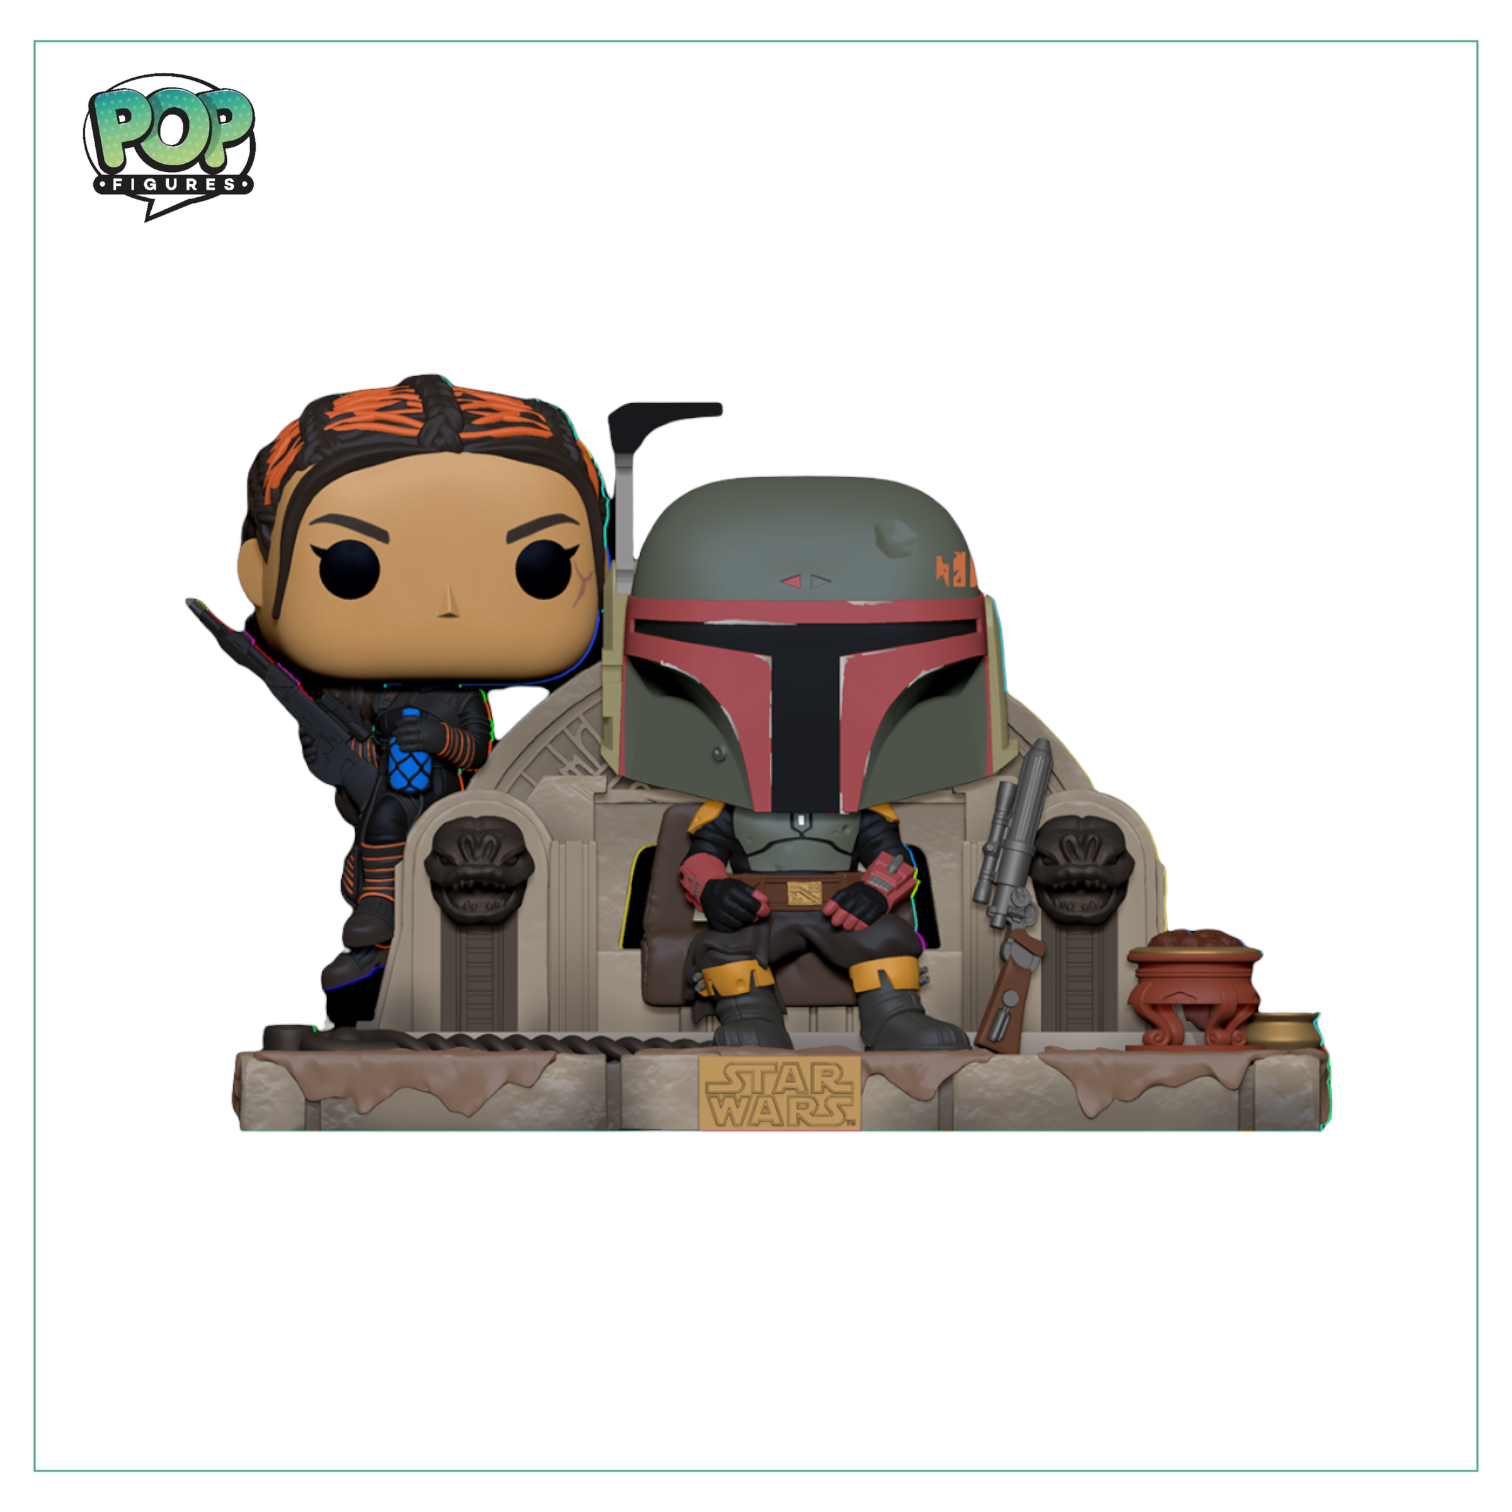 Boba Fett and Fennec on Throne #486 Deluxe Funko Pop! Star Wars